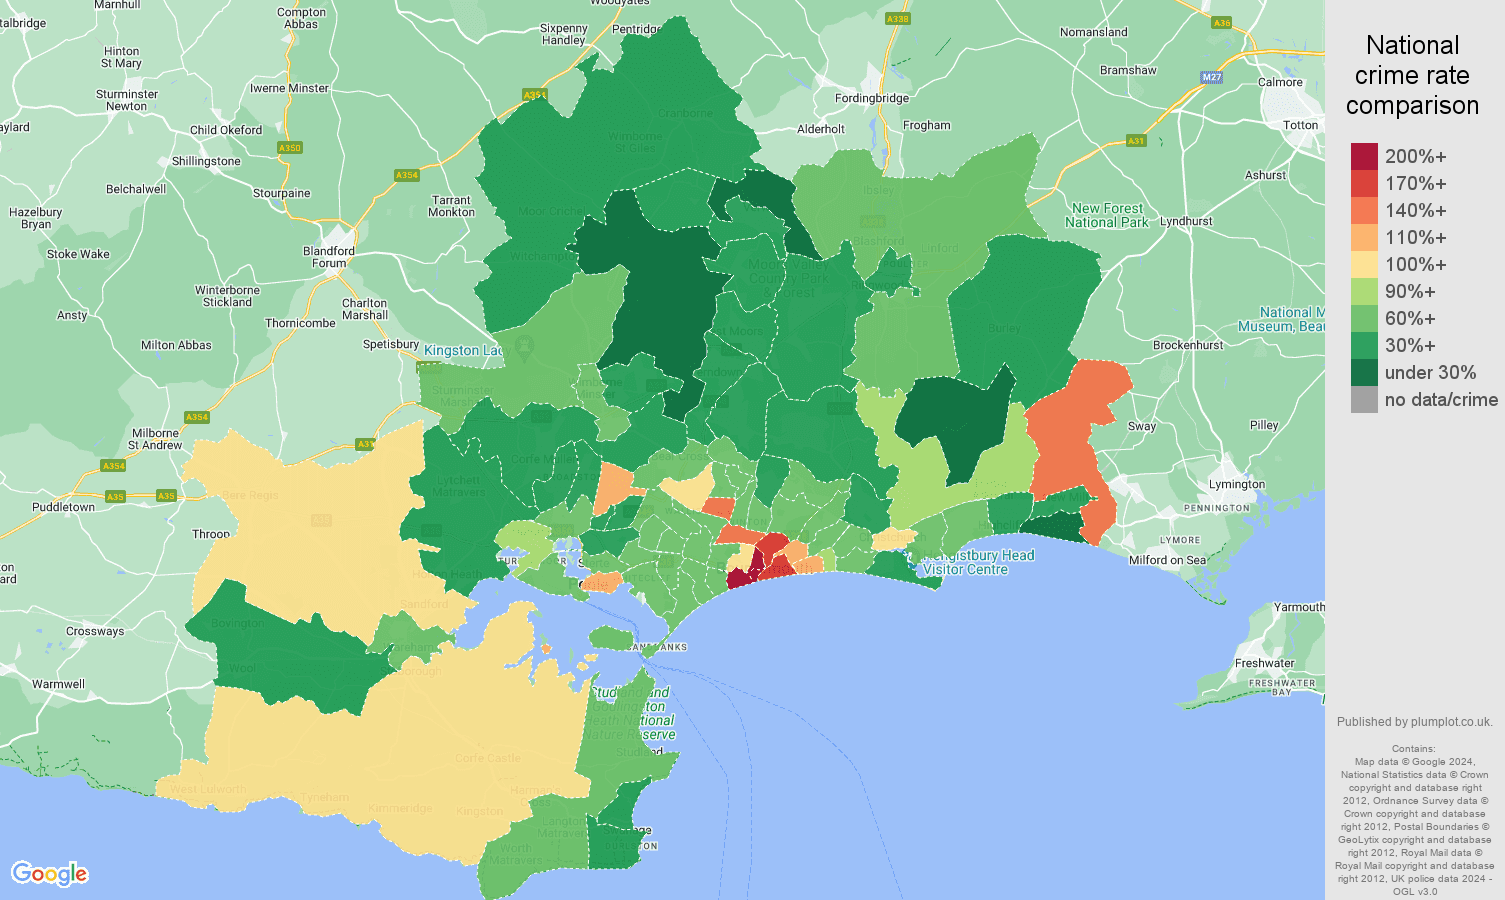 Bournemouth other theft crime rate comparison map